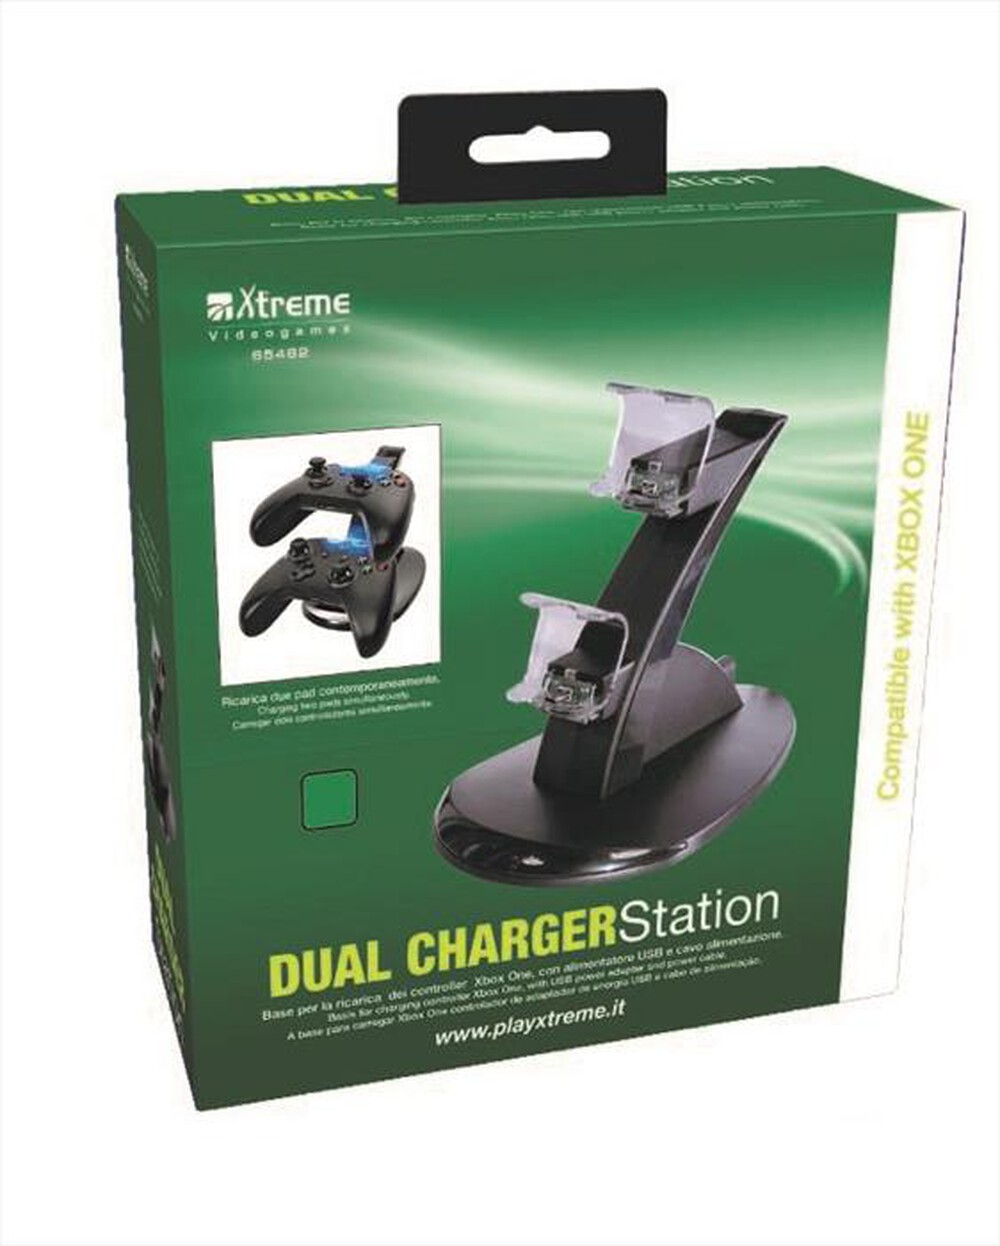 "XTREME - 65462 - Xbox One Dual Charger Station"